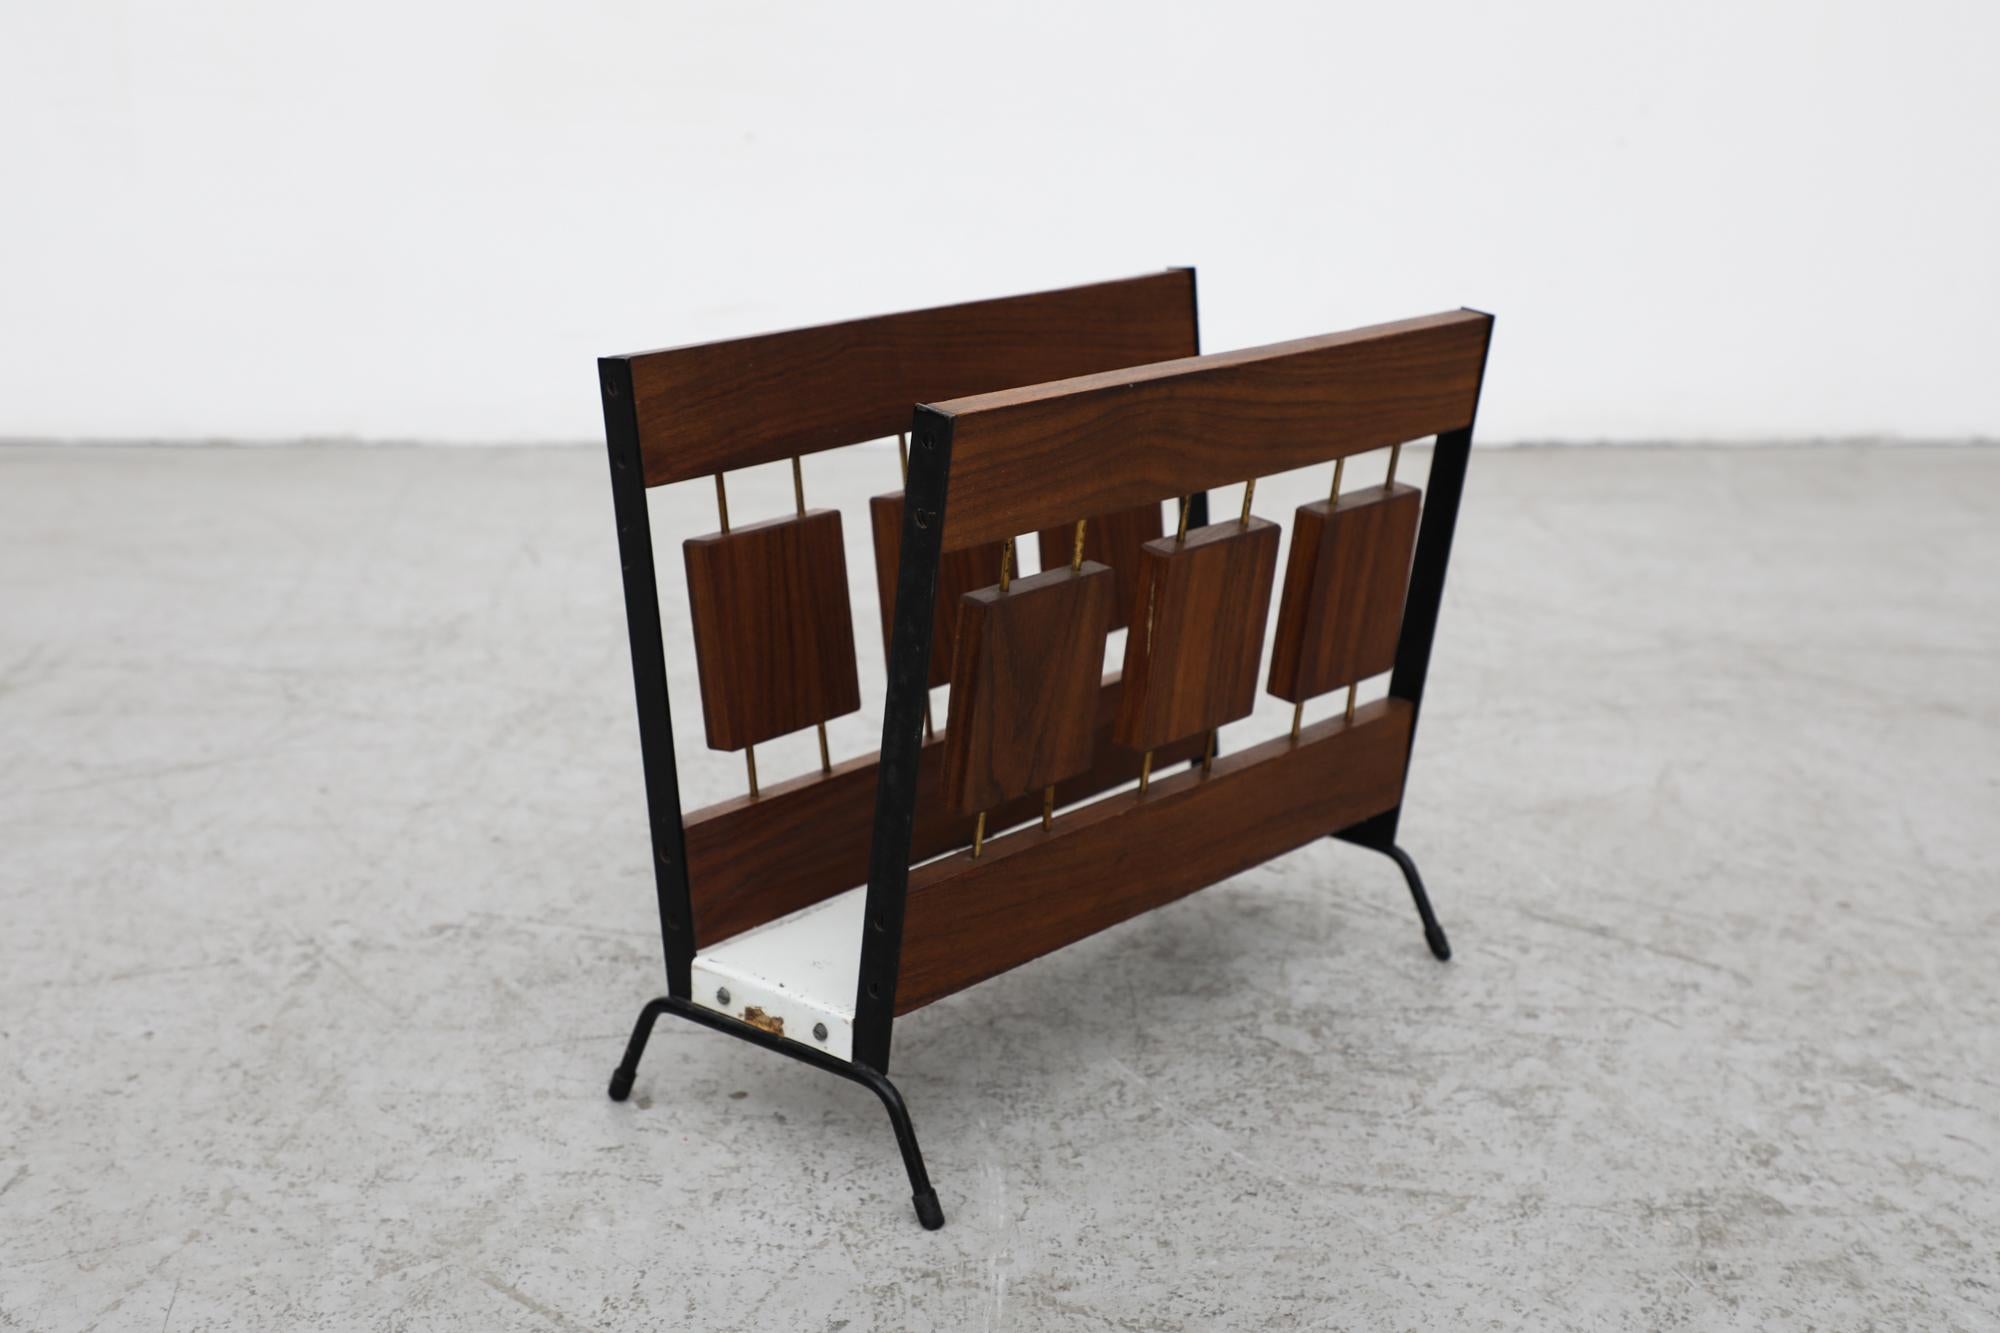 Beautiful, Mid-Century, 1970's wood block magazine rack by Dutch manufacturer Brovorm. Beautifully designed, featuring a black and white enameled metal frame adorned with subtle brass accents. The piece is in original condition with some visible